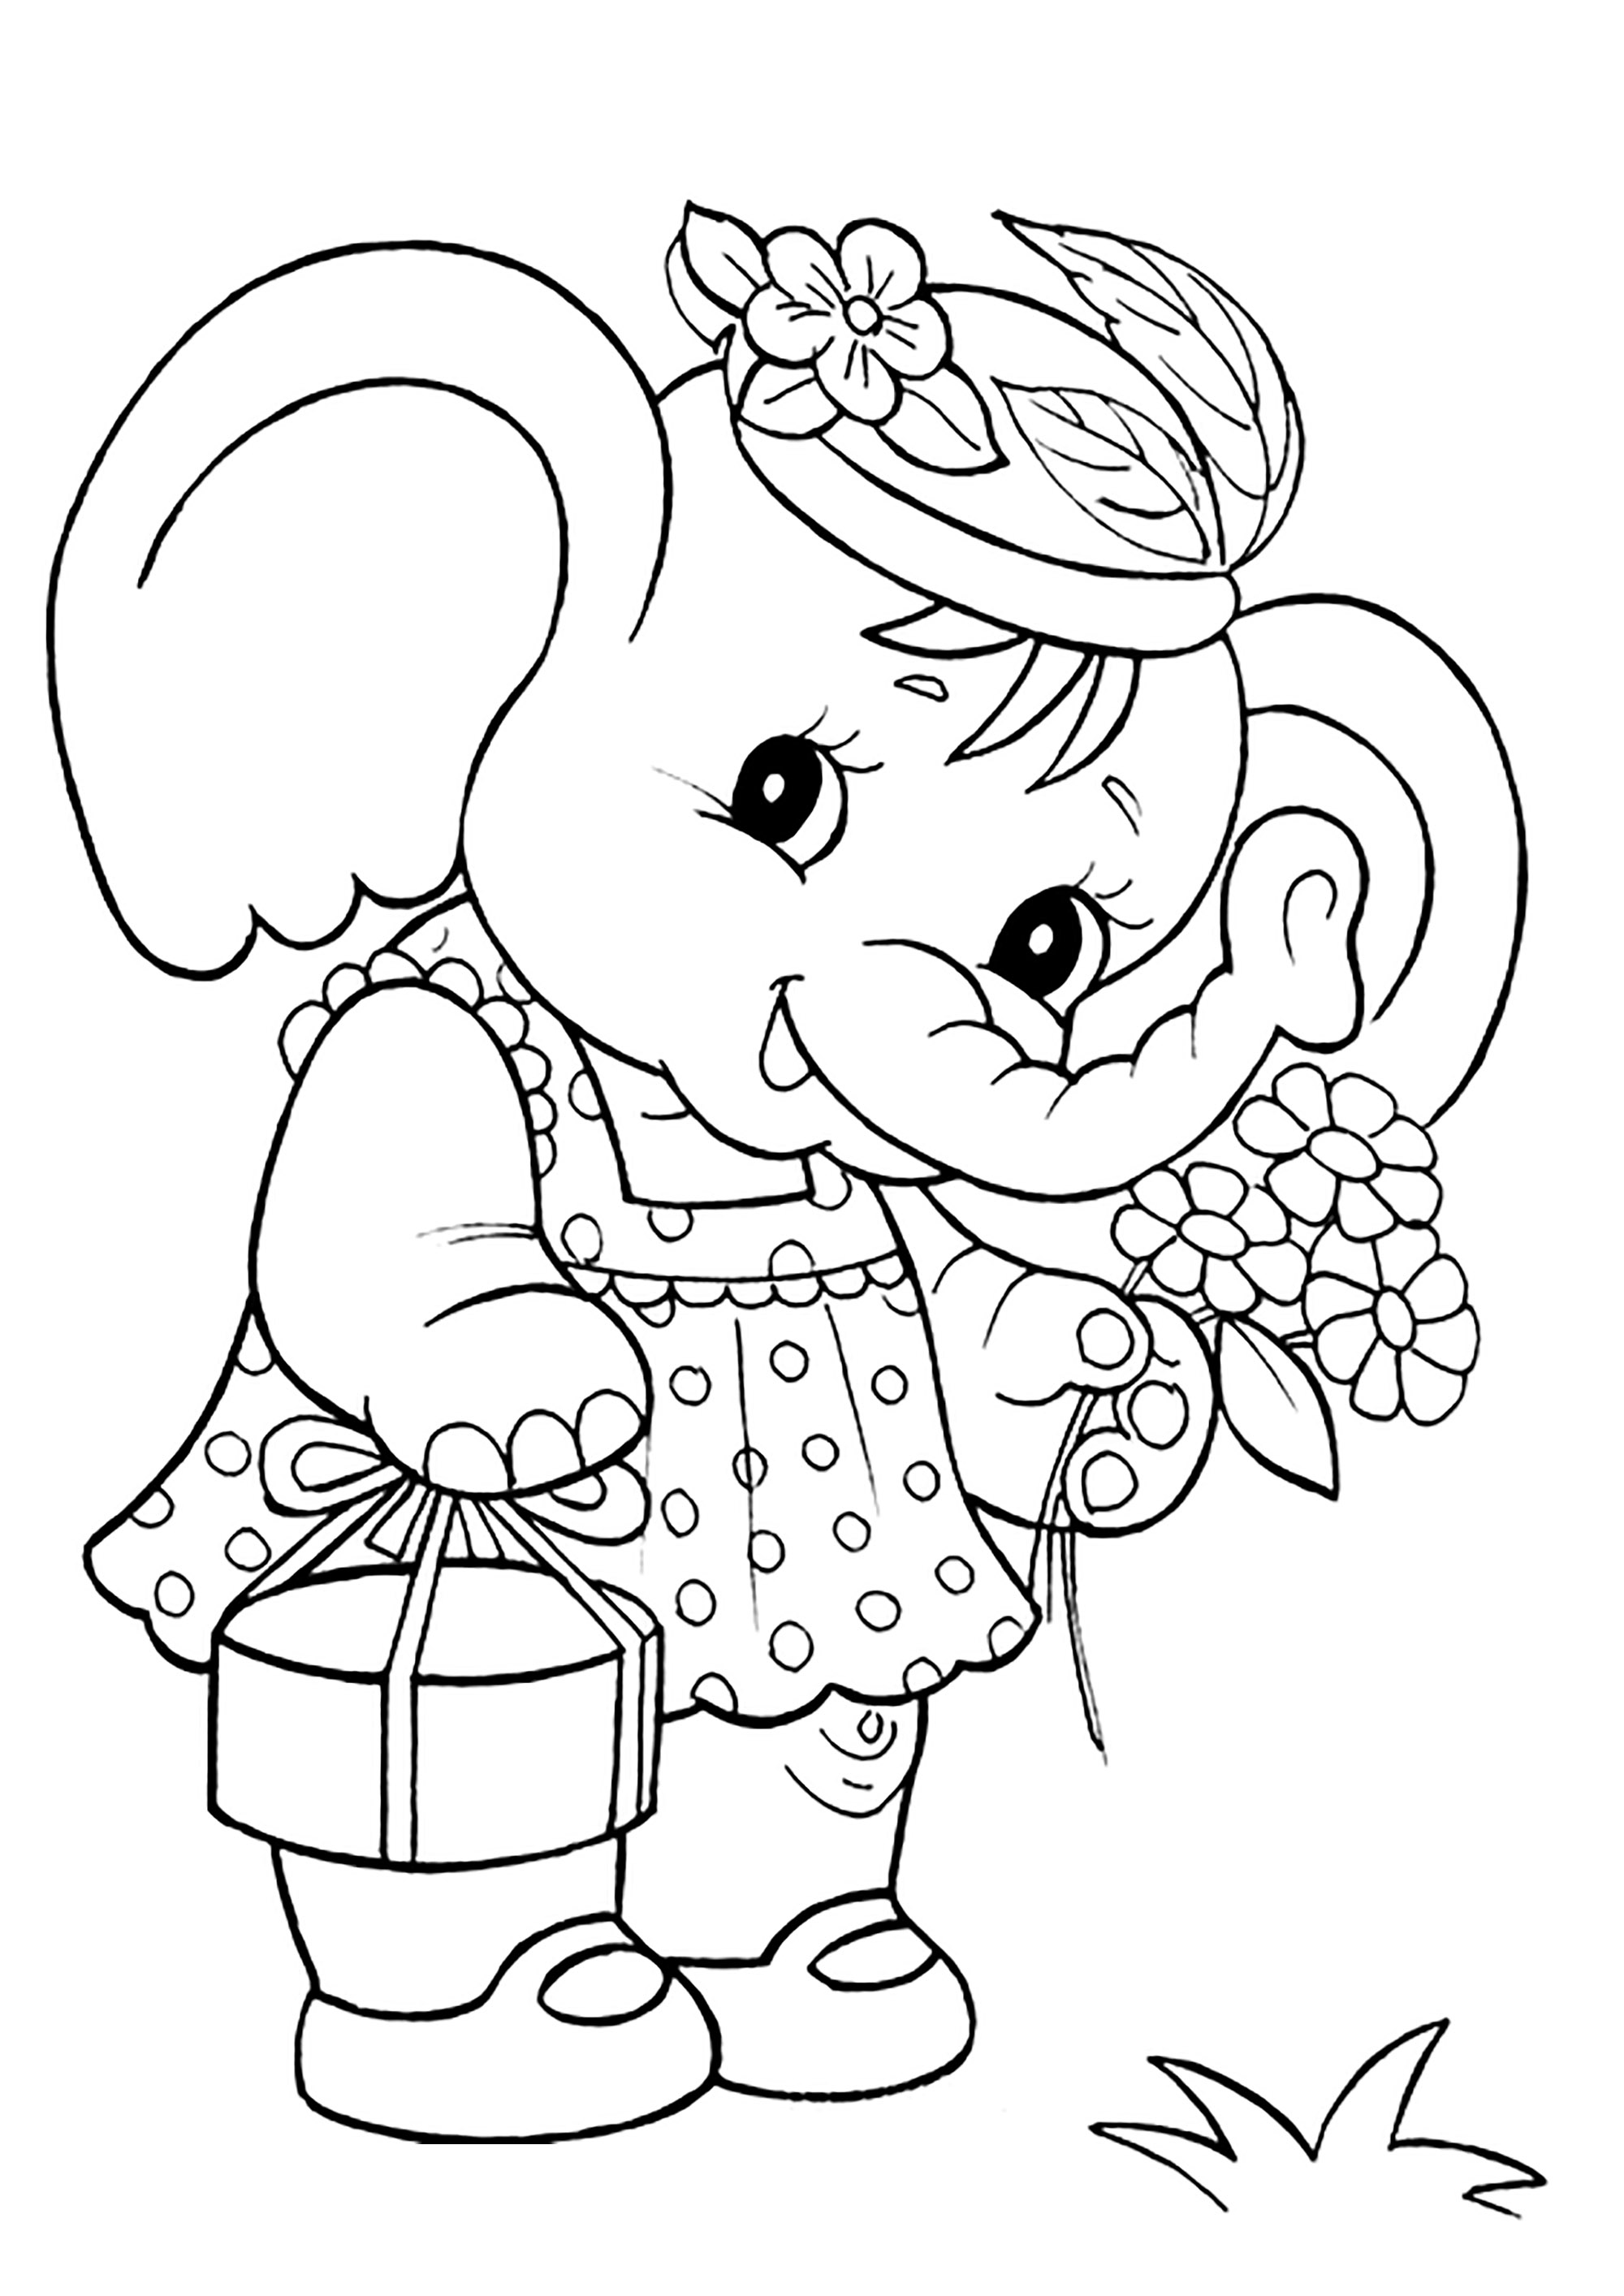 Simple Elephants coloring page to download for free